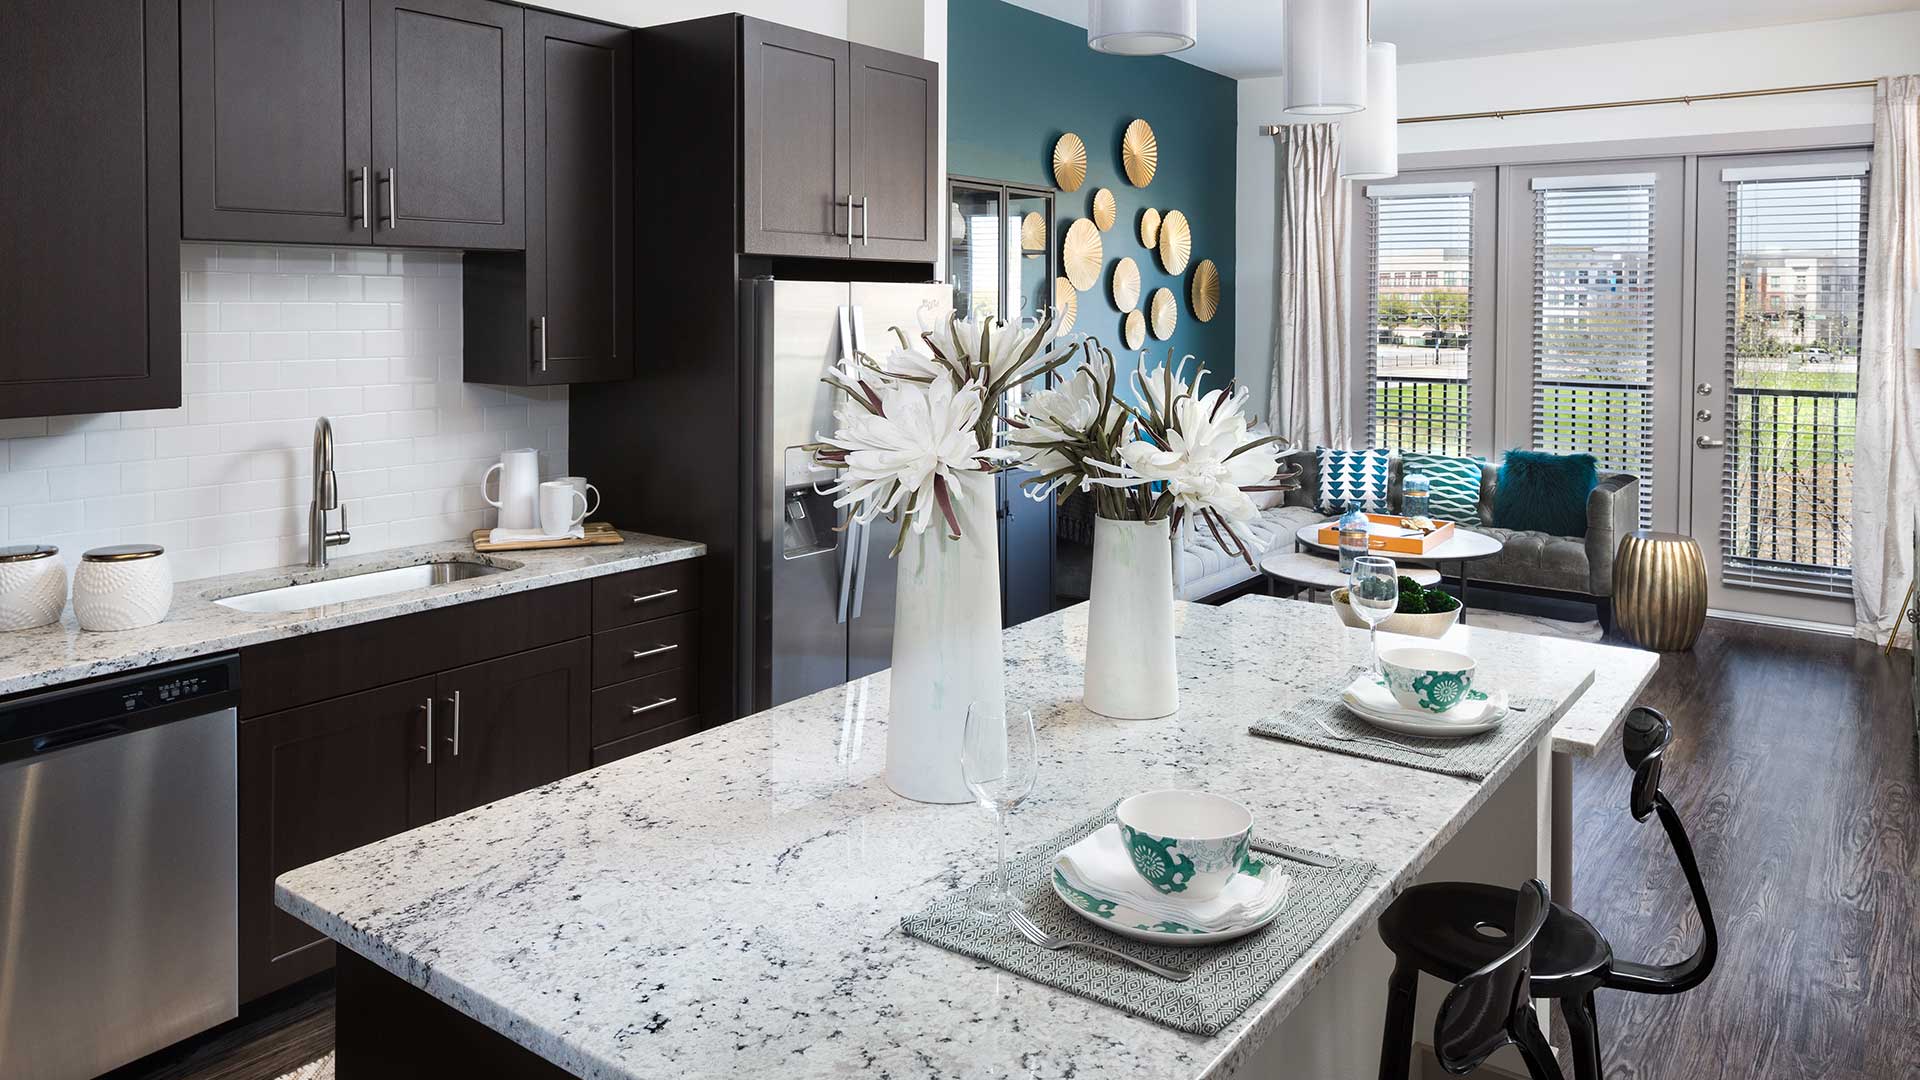 Looking along the kitchen island in a residence at Crest at Las Colinas Station. The kitchen runs along the left wall with ebony cabinets and stainless steel appliances. The island has two large flower vases and two place settings. There are two stools in front of the island on the right with the living room seen further behind.